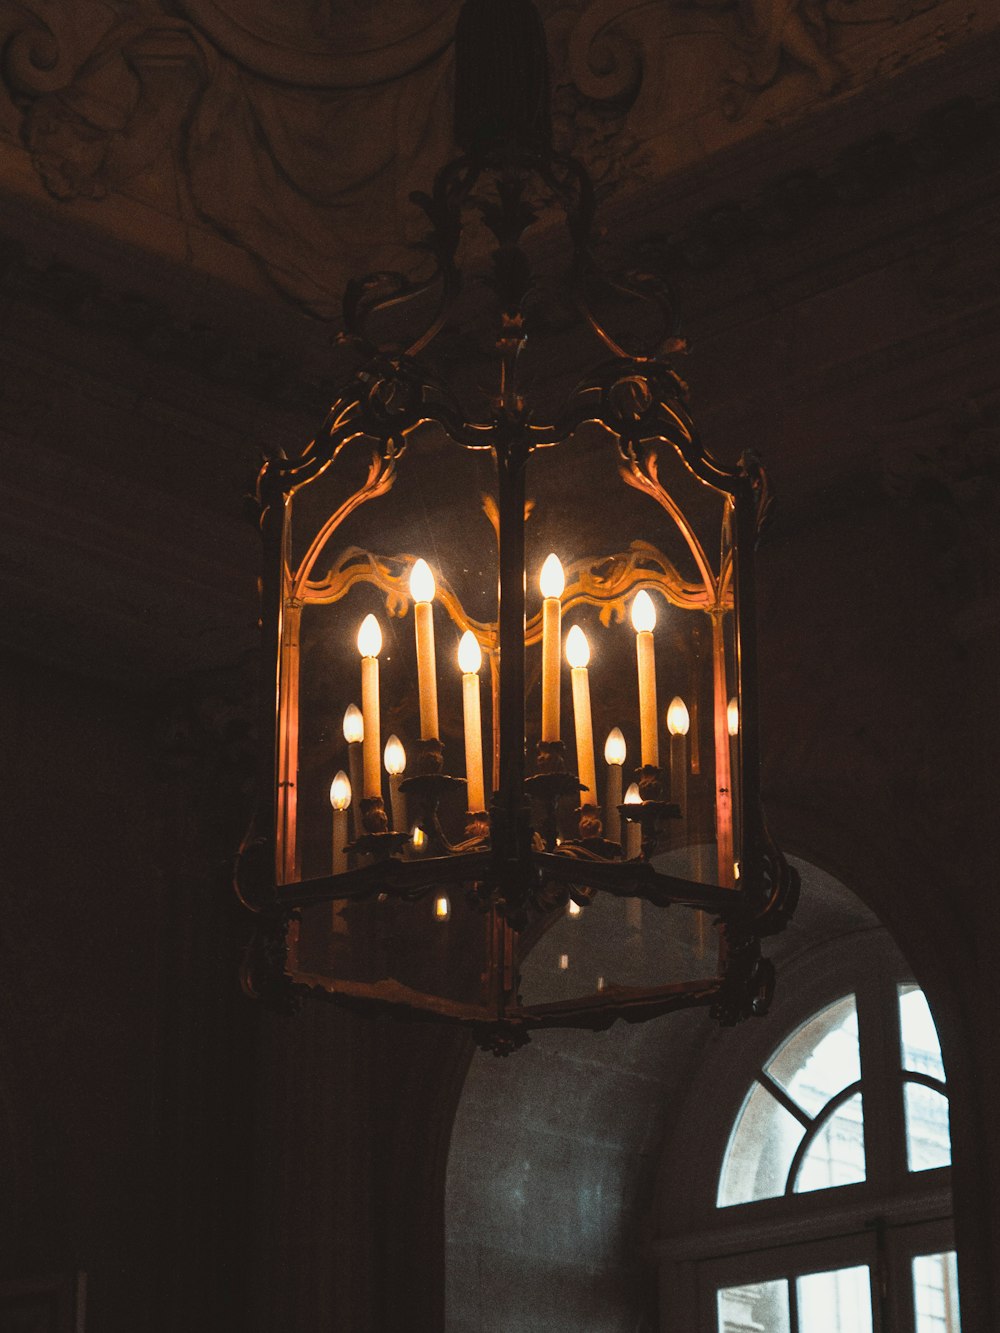 lit brown and white chandelier